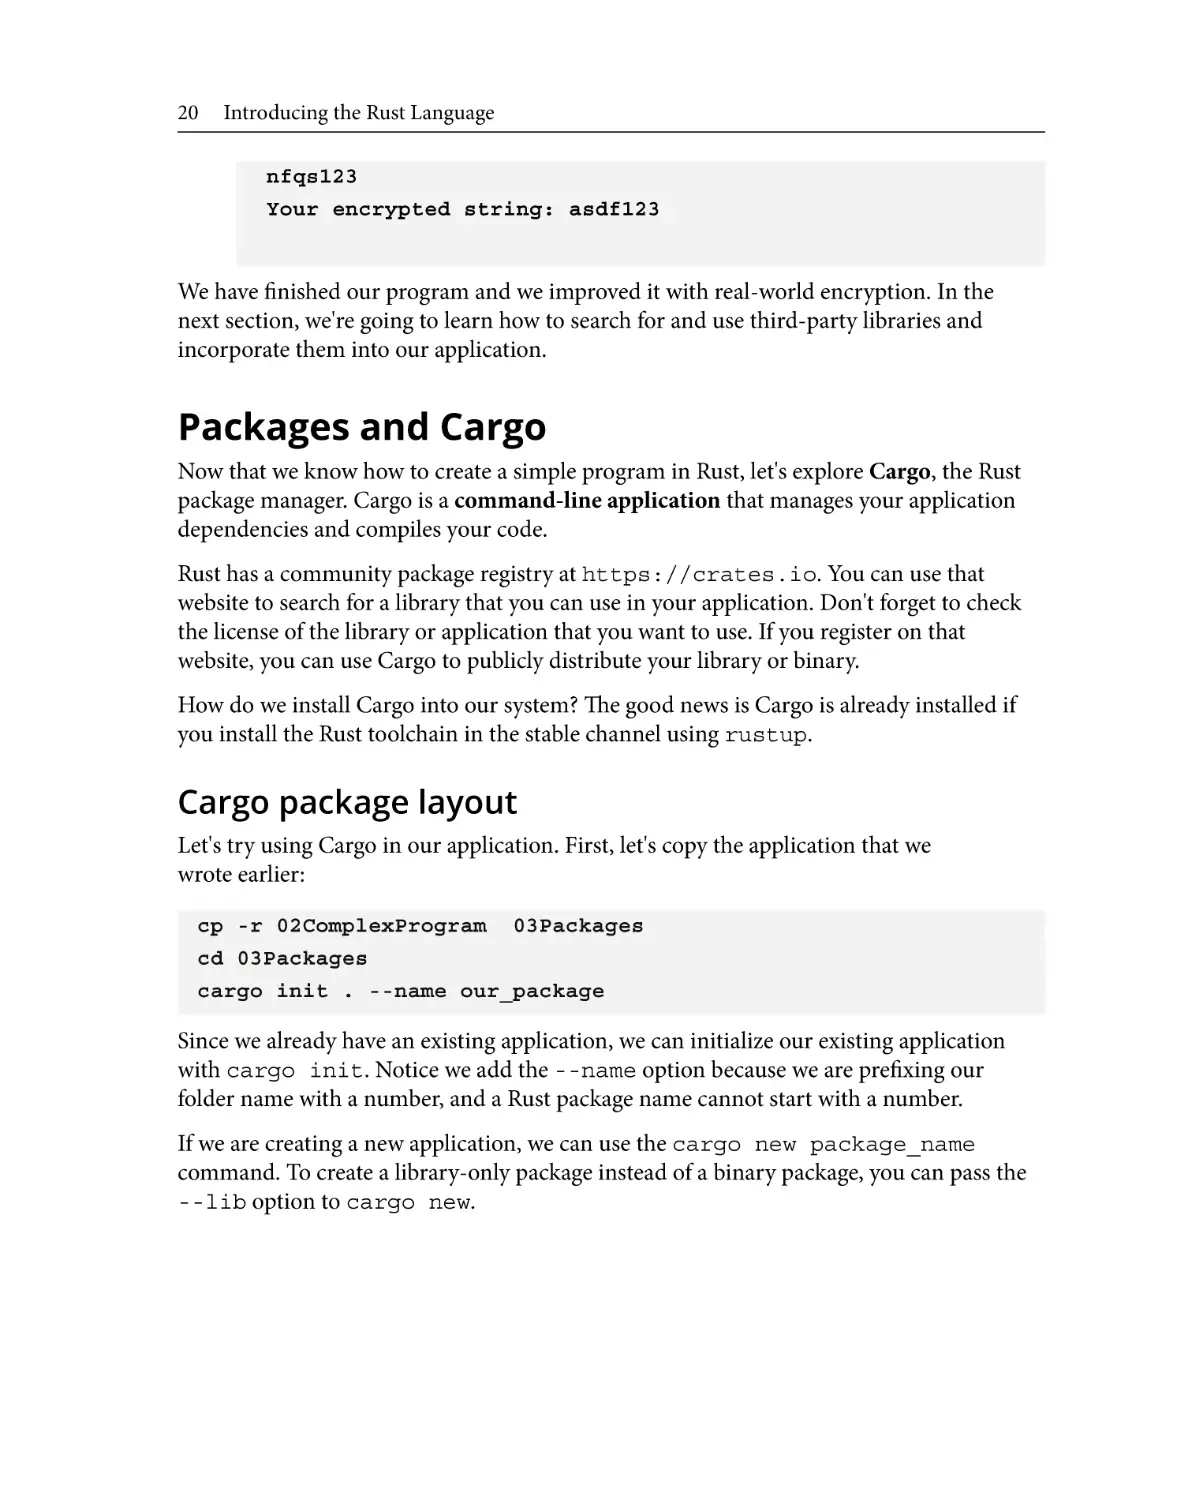 Packages and Cargo
Cargo package layout